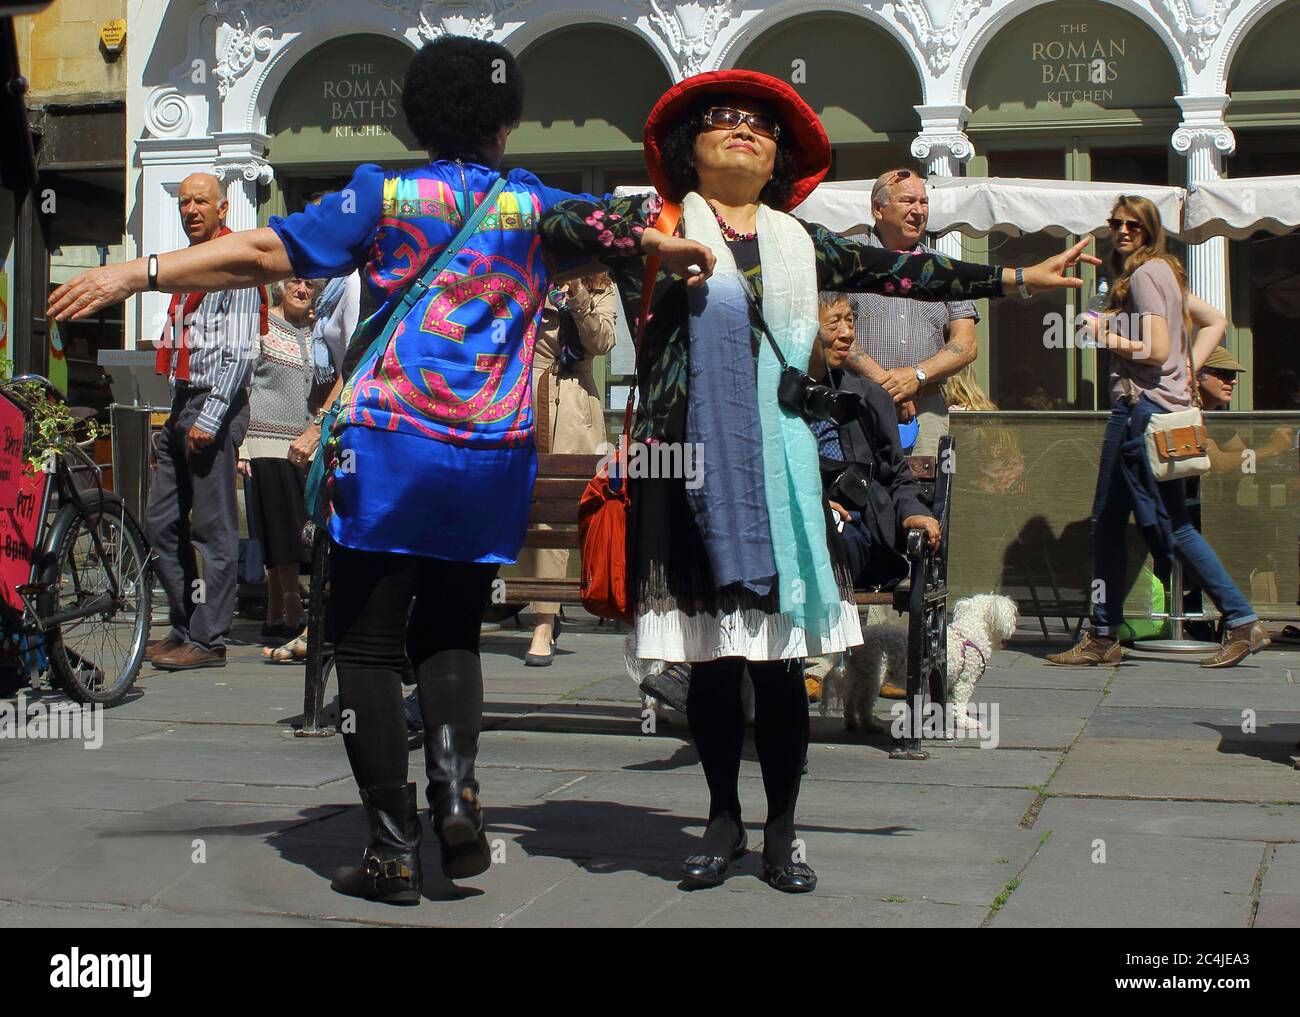 Chinese tourists are dancing in front of Roman Bath in Bath, England. The photo was taken on 5th June, 2015 Stock Photo